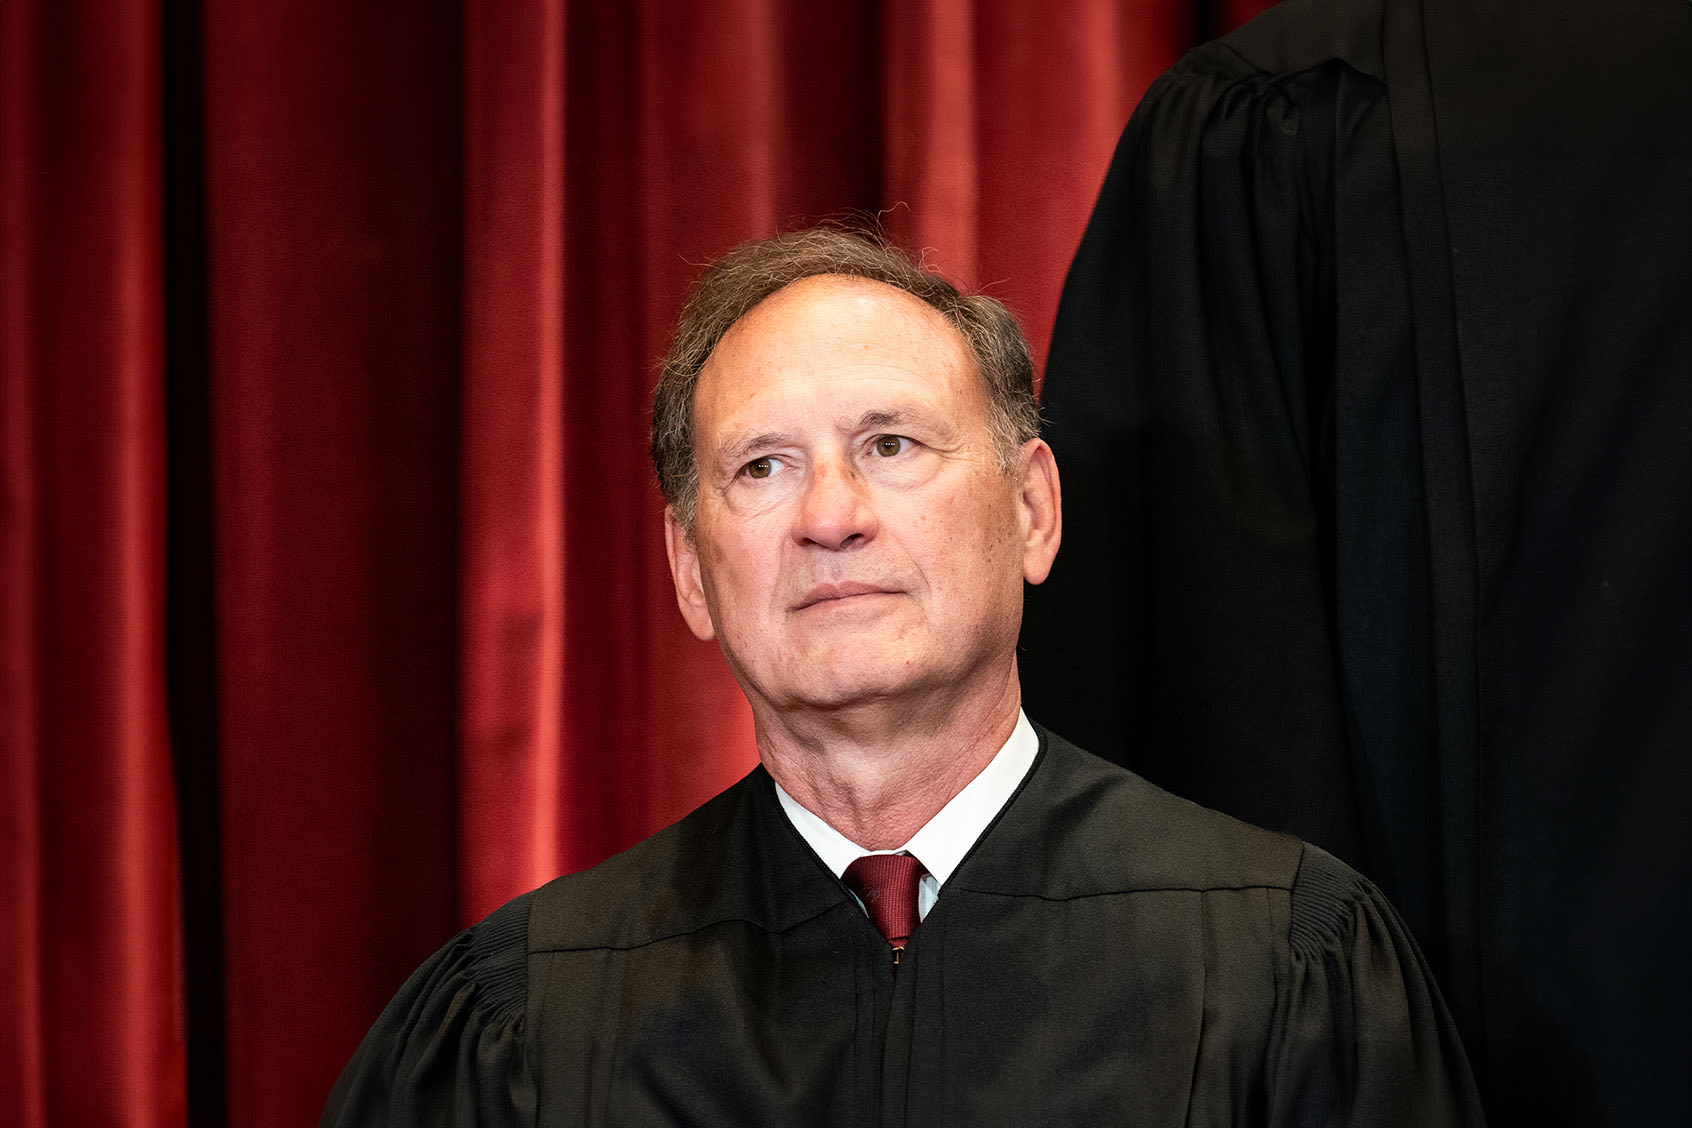 "Out of control": Legal experts say Justice Alito's "Stop the Steal" symbol is a huge red flag